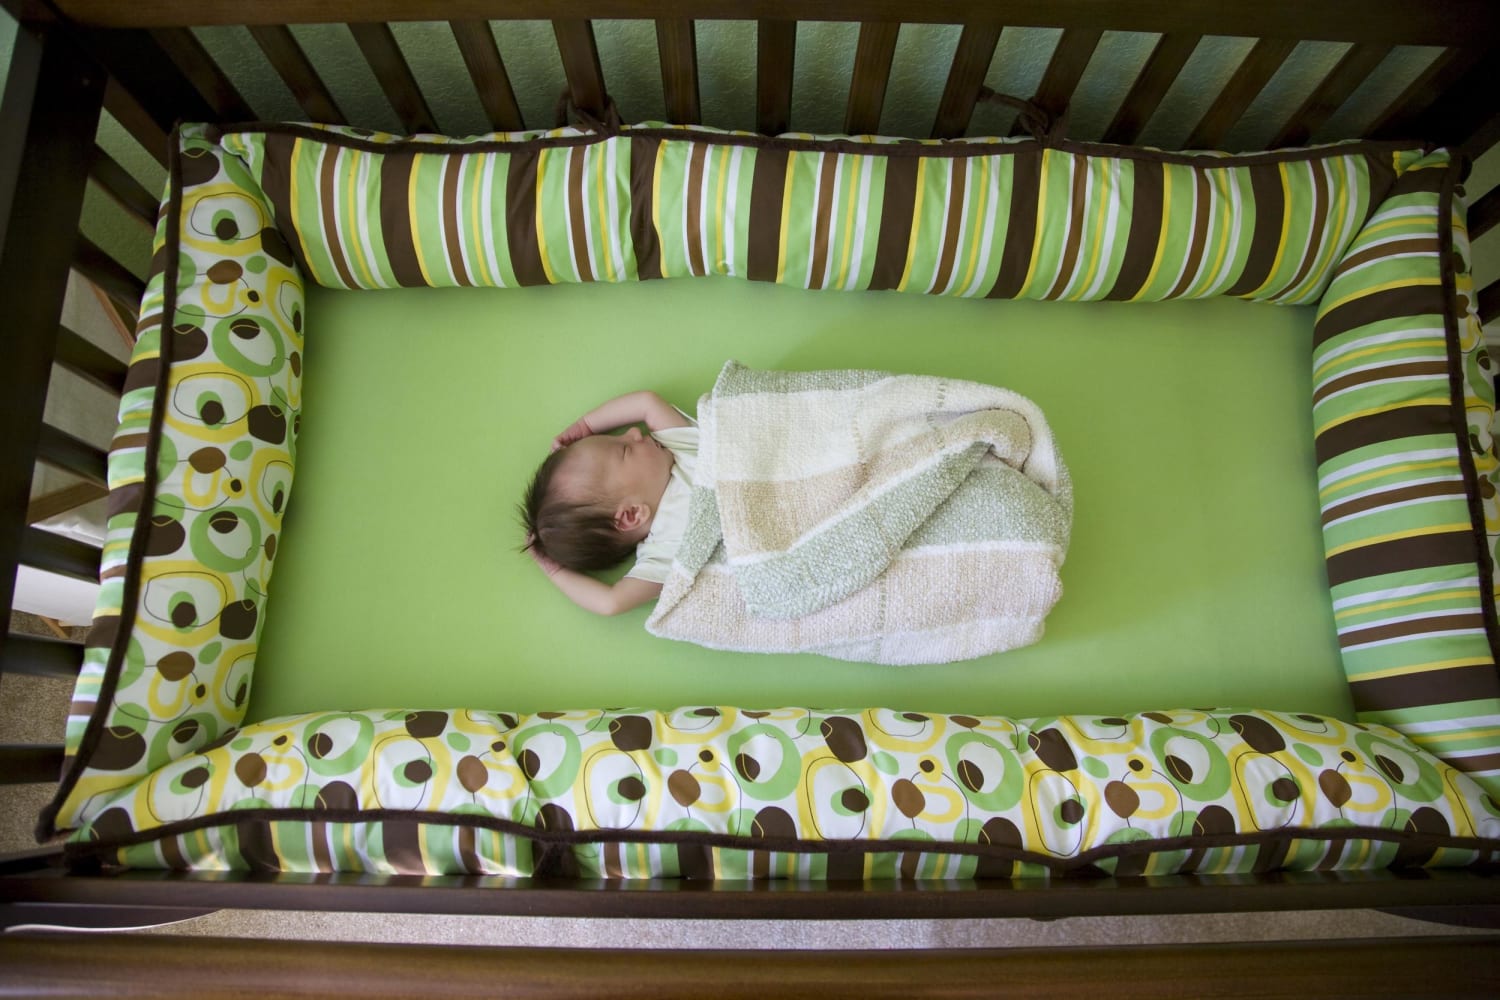 White Noise Machines Could Hurt Babies' Hearing, Study ...